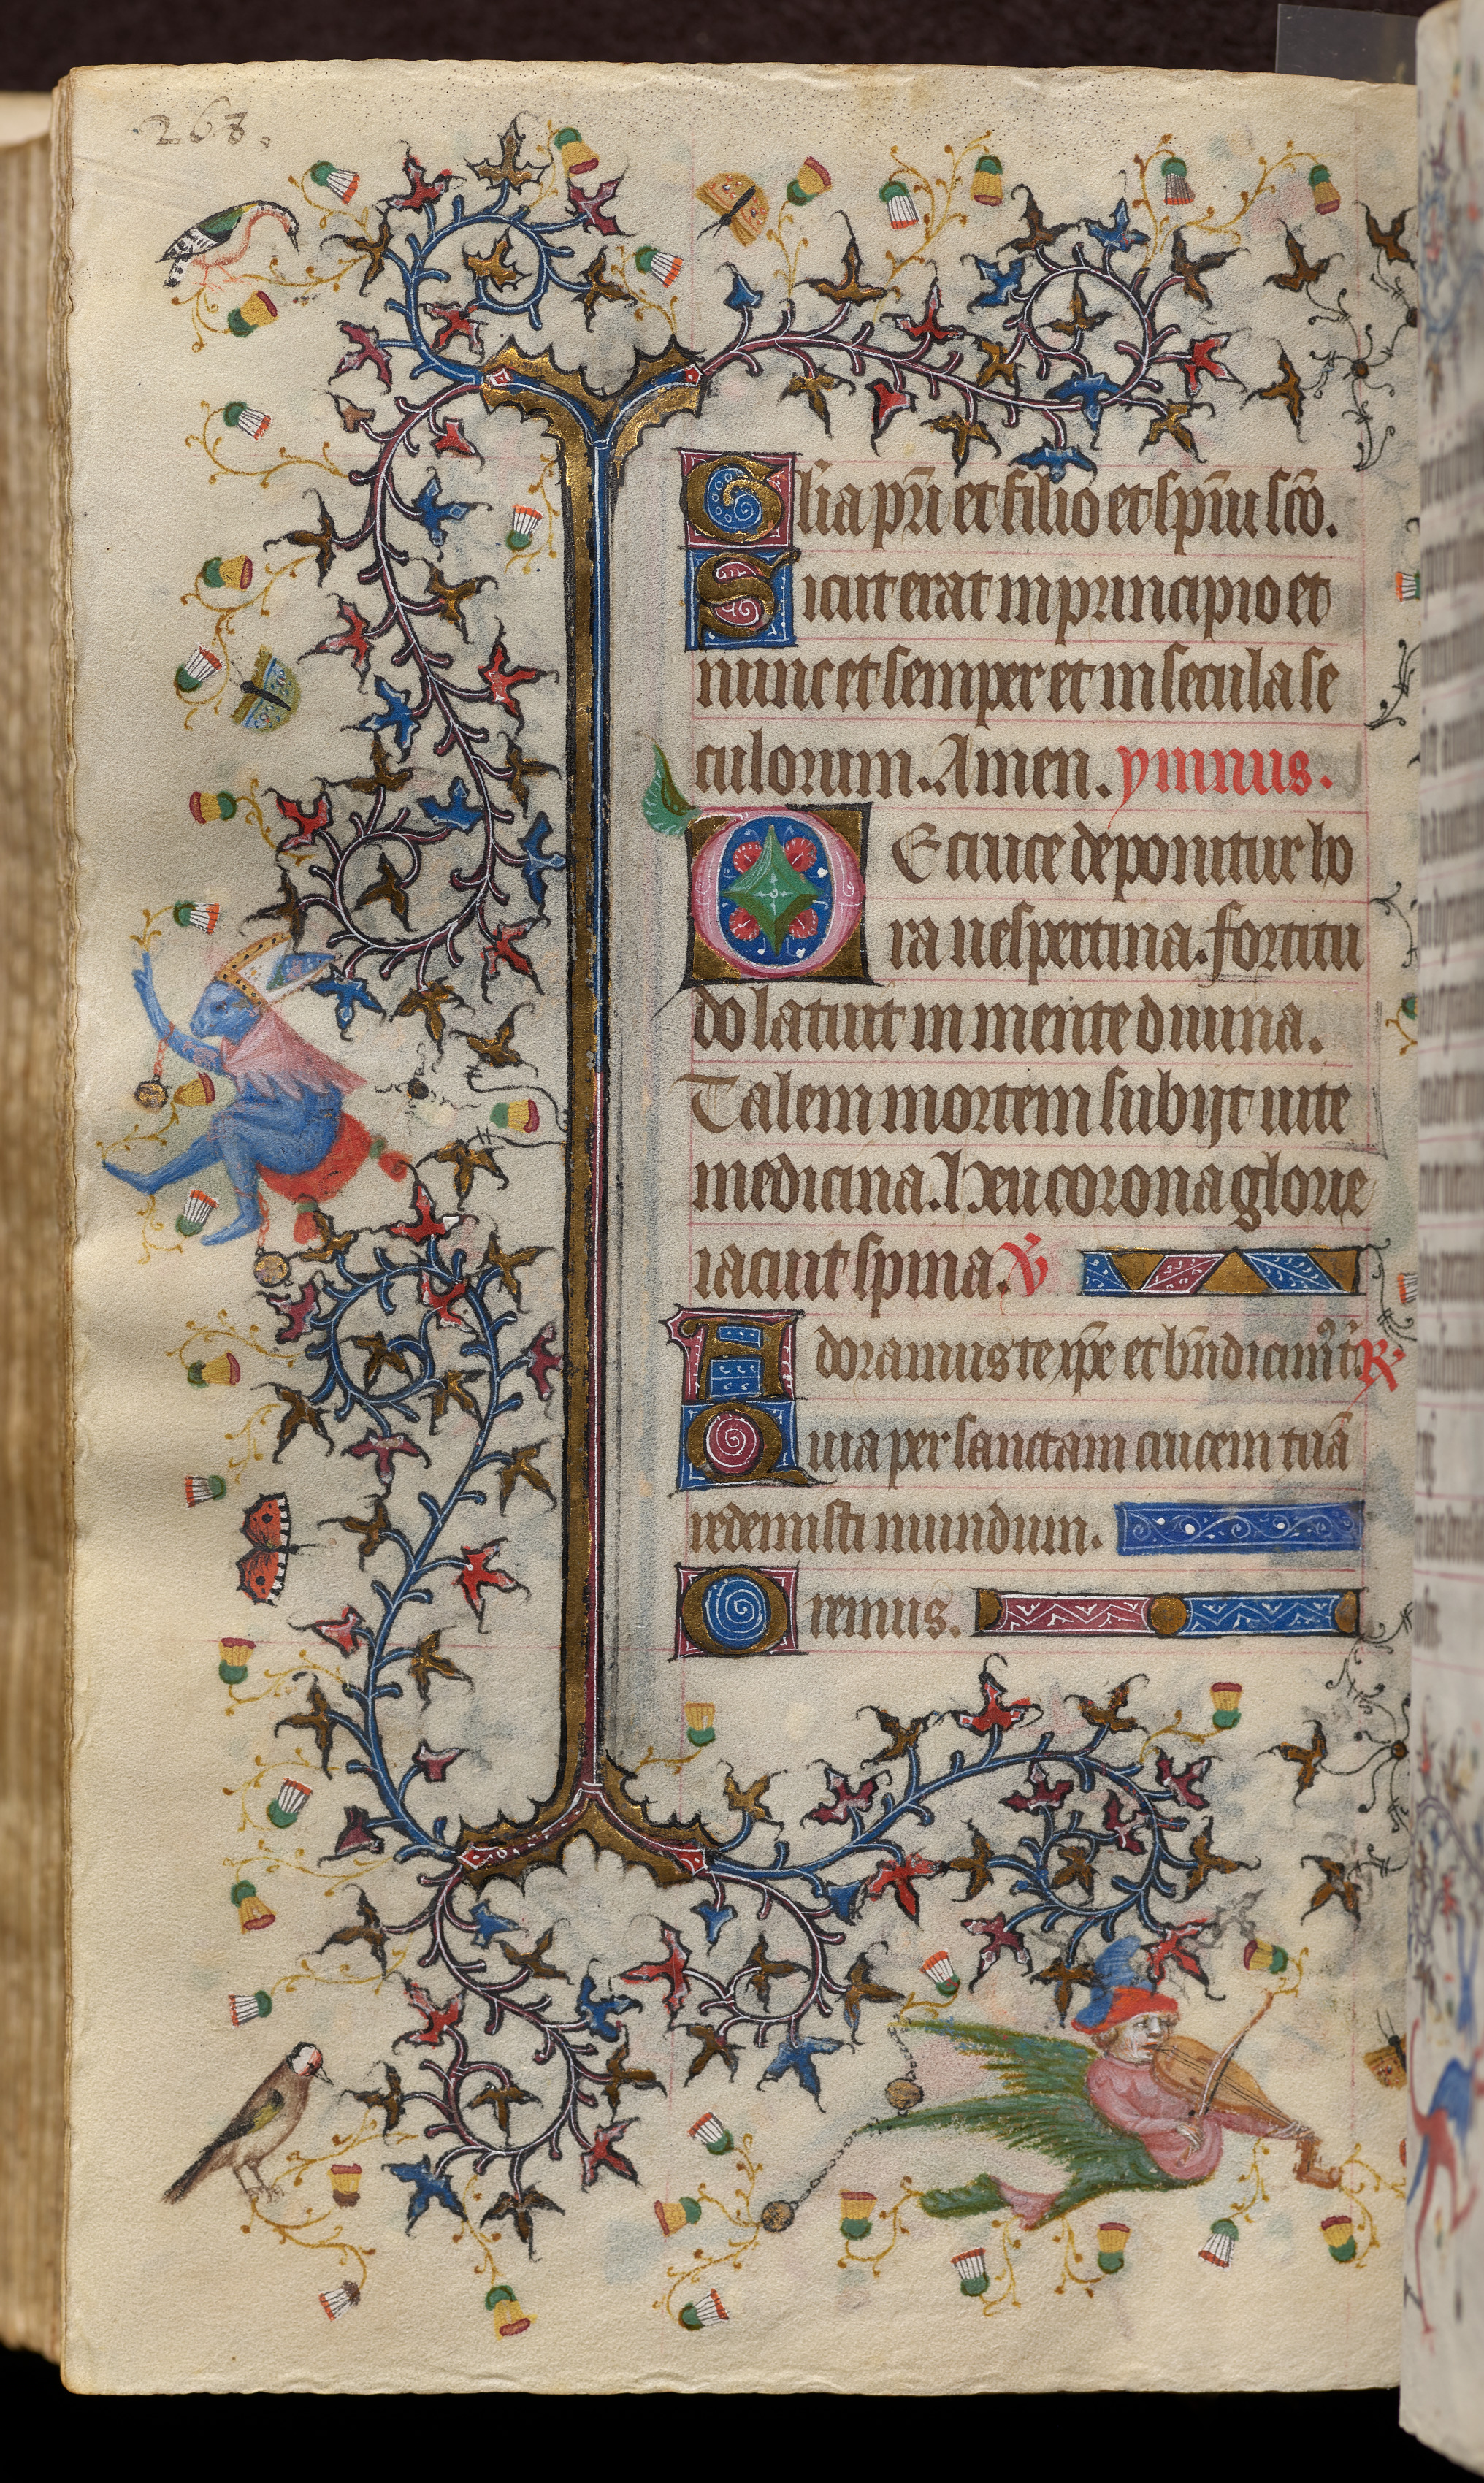 Hours of Charles the Noble, King of Navarre (1361-1425): fol. 134v, Text